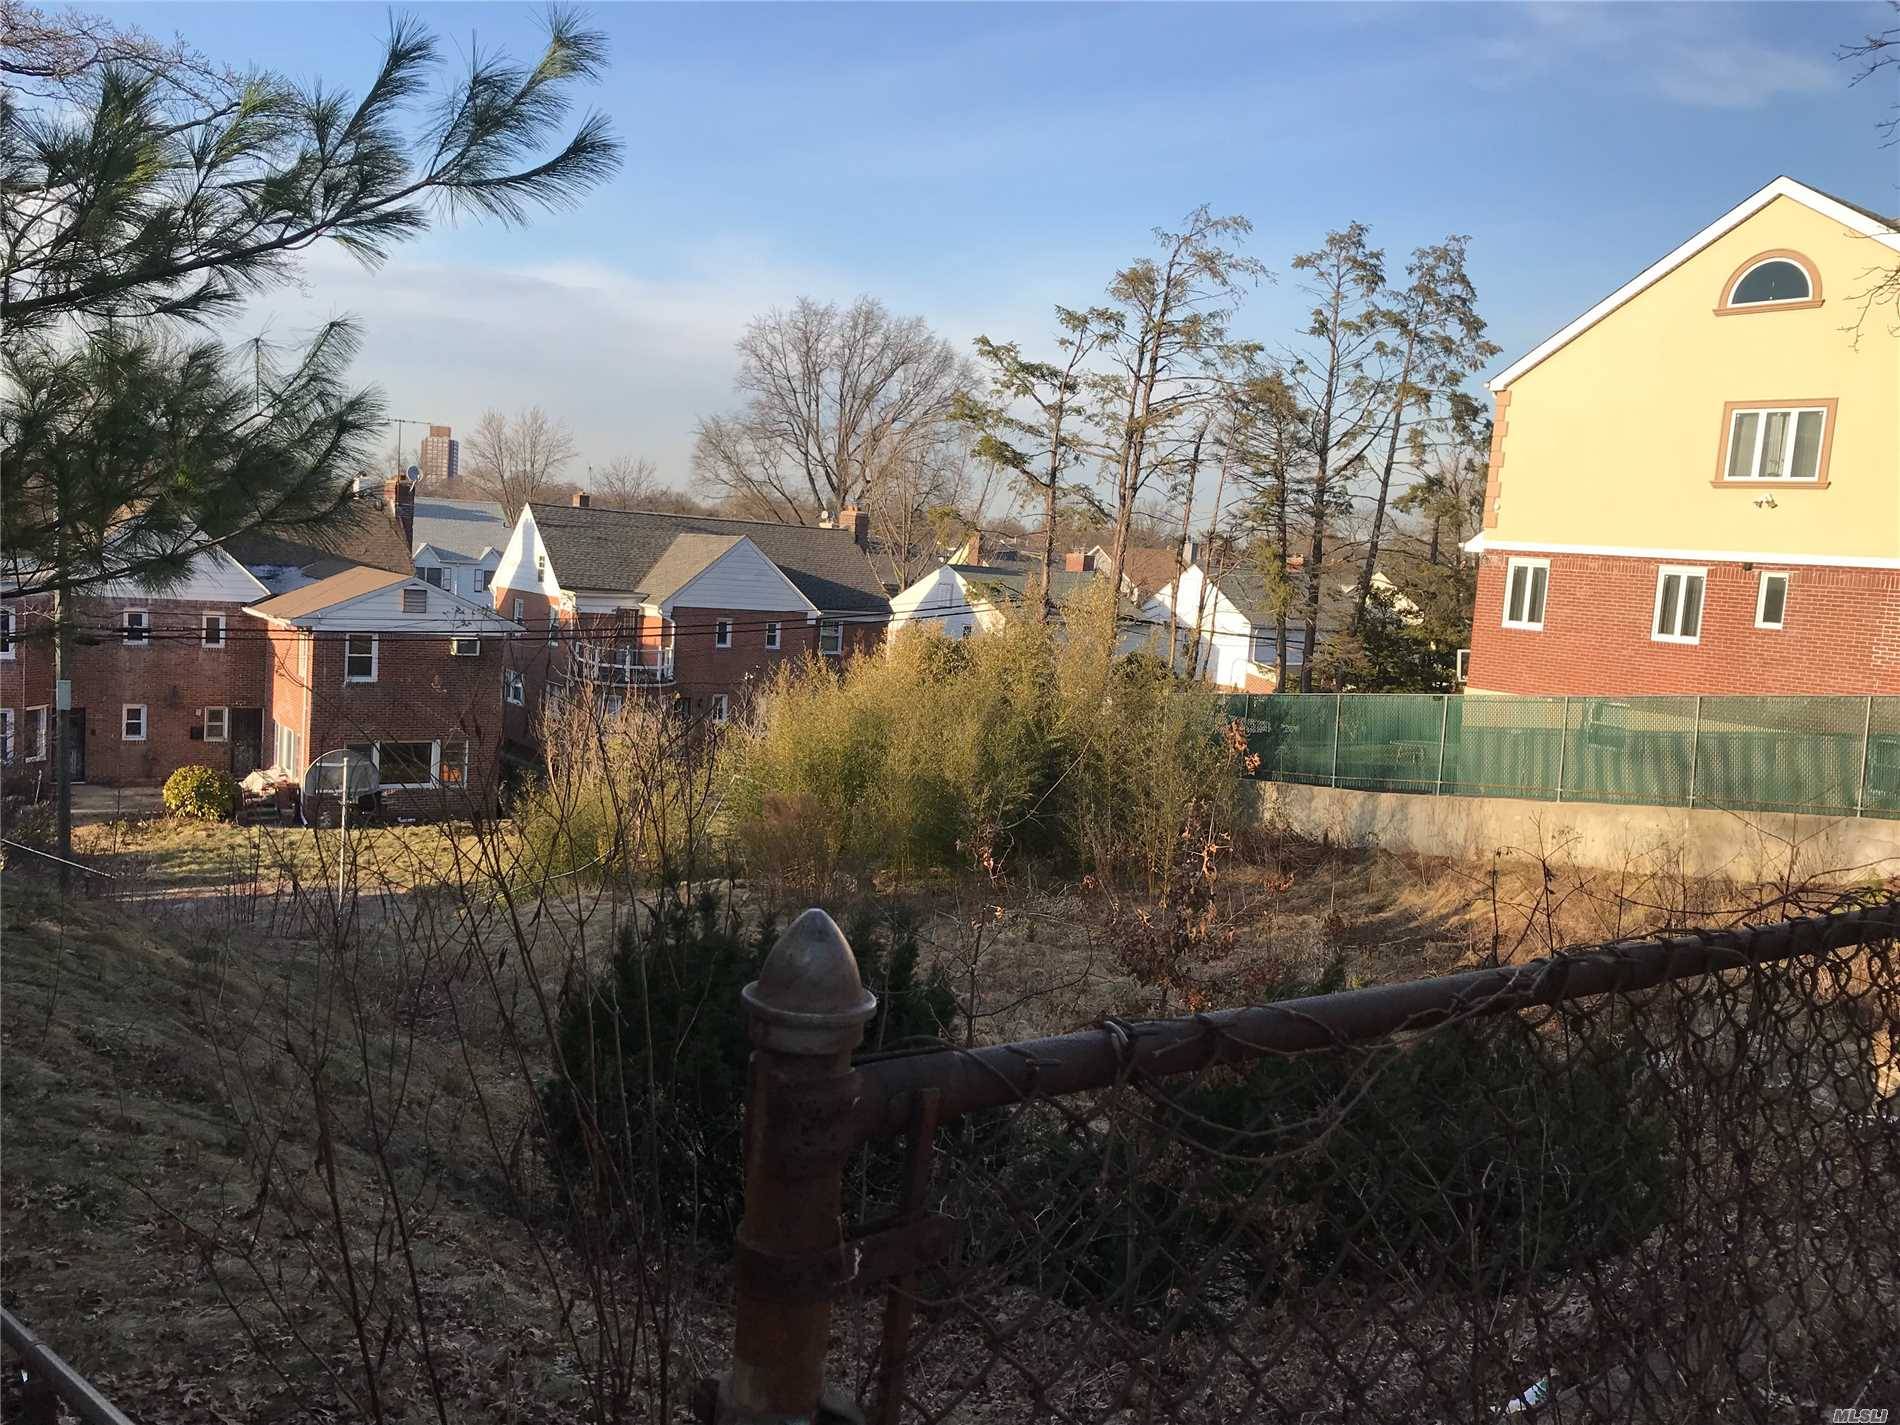 Rare Opportunity Upper Class Neighborhood In Jamaica Estates To Build Your Dream Home/S, 2 Combined Lots, Can Be Built 2 One Family Or 1 Big House.